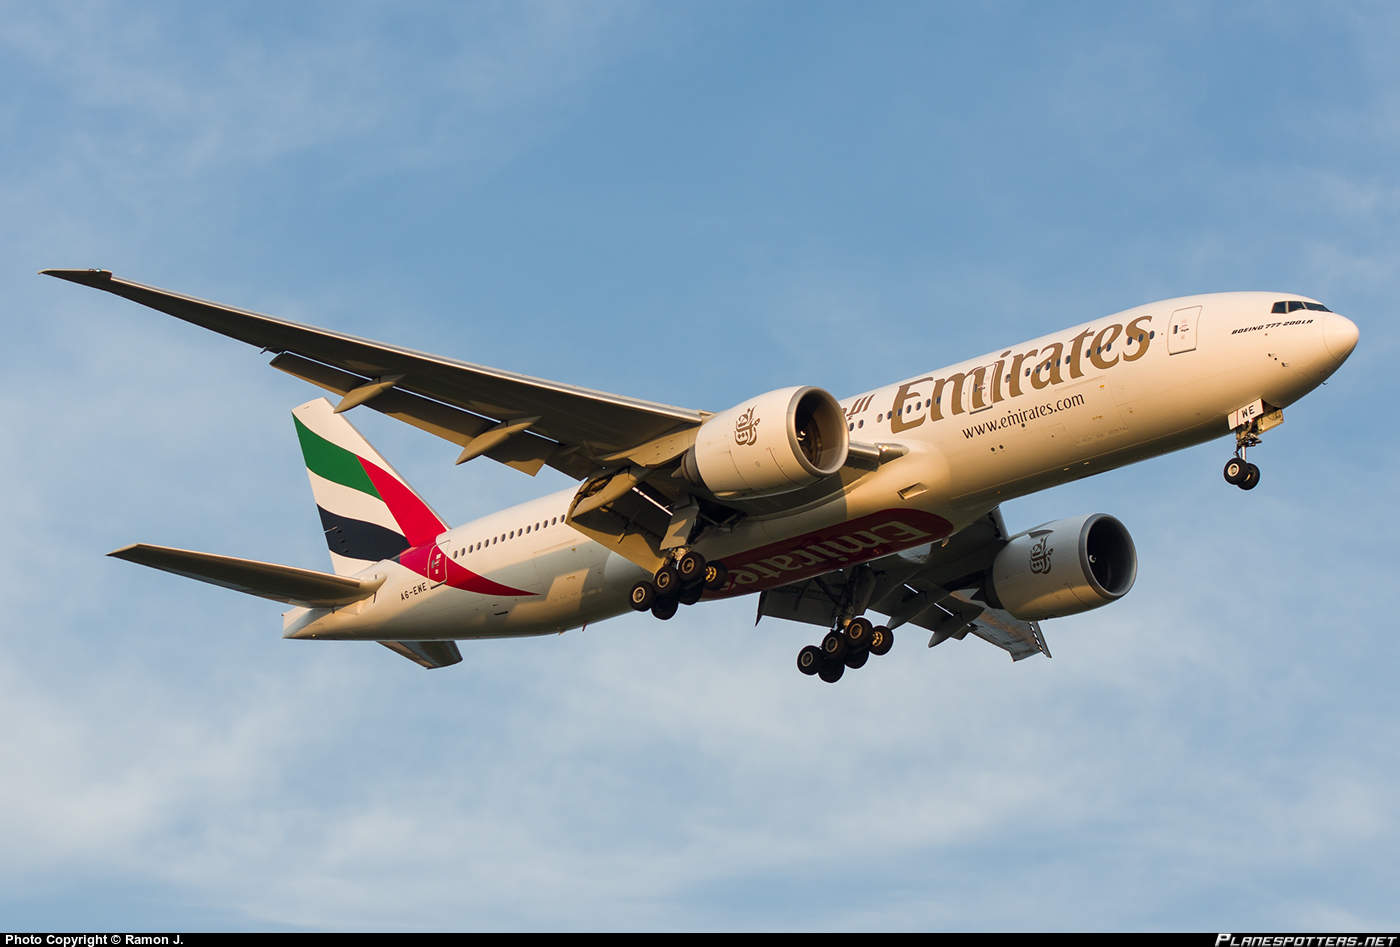 Emirates expands with two new cities in PRC